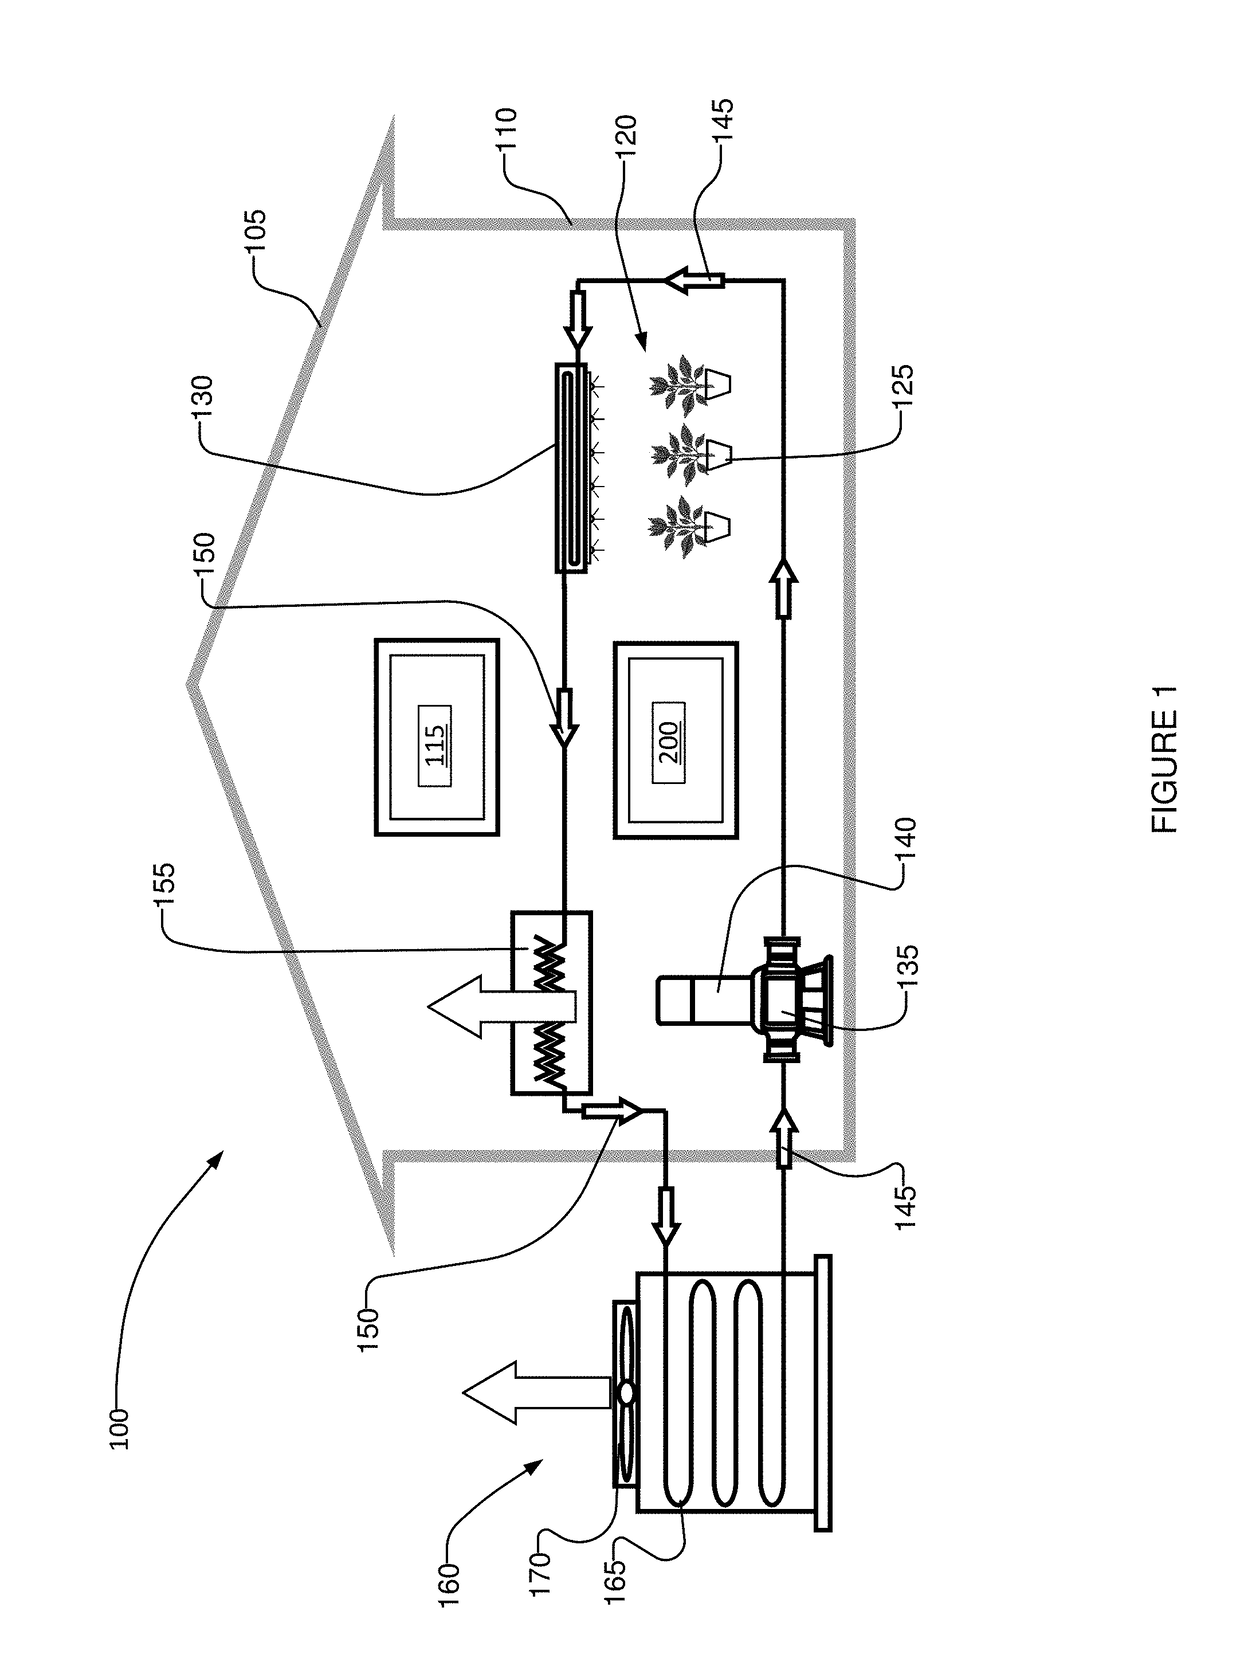 LED lighting system and opertaing method for irradiation of plants